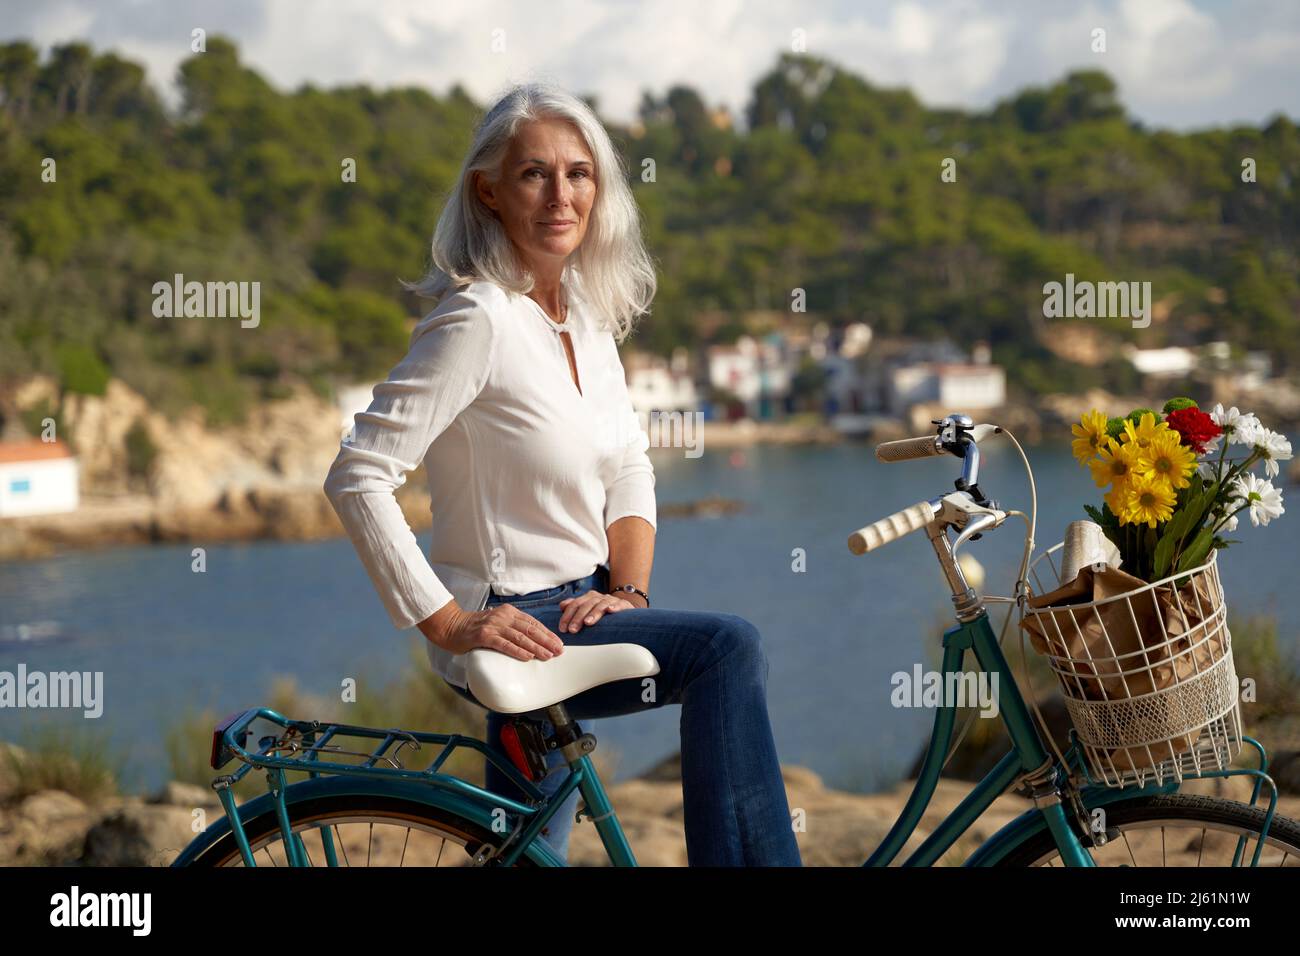 Smiling woman with bicycle on sunny day Stock Photo